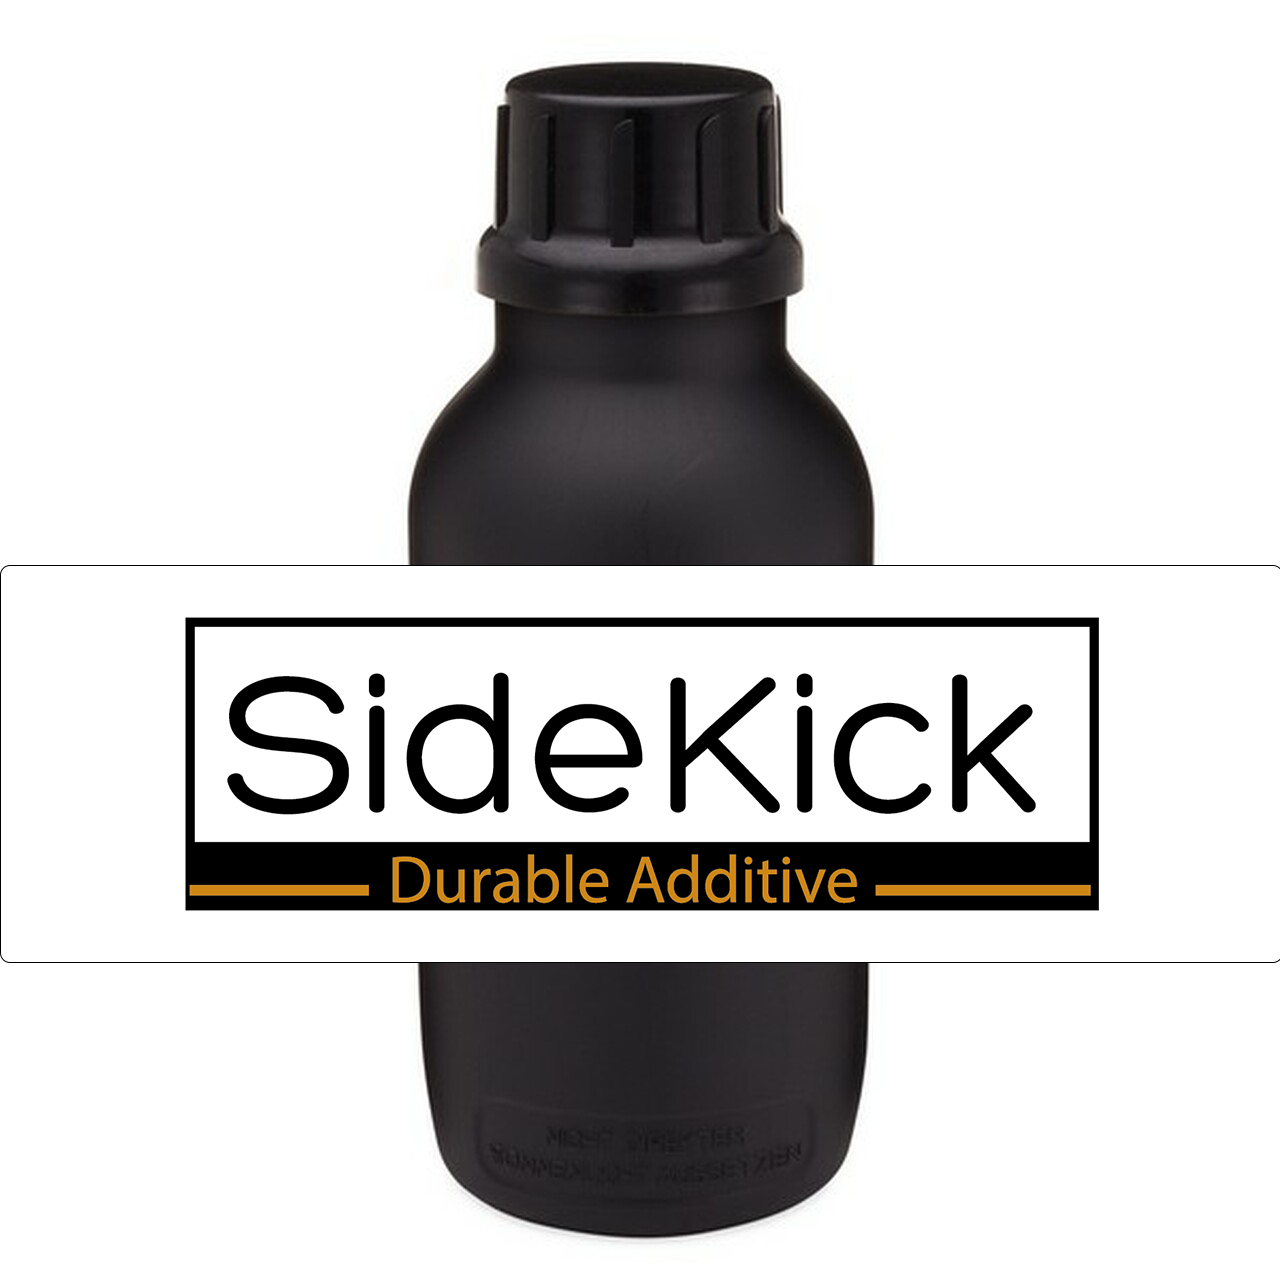 3DRS Sidekick Durable Additive (Clear / Non-Pigmented)